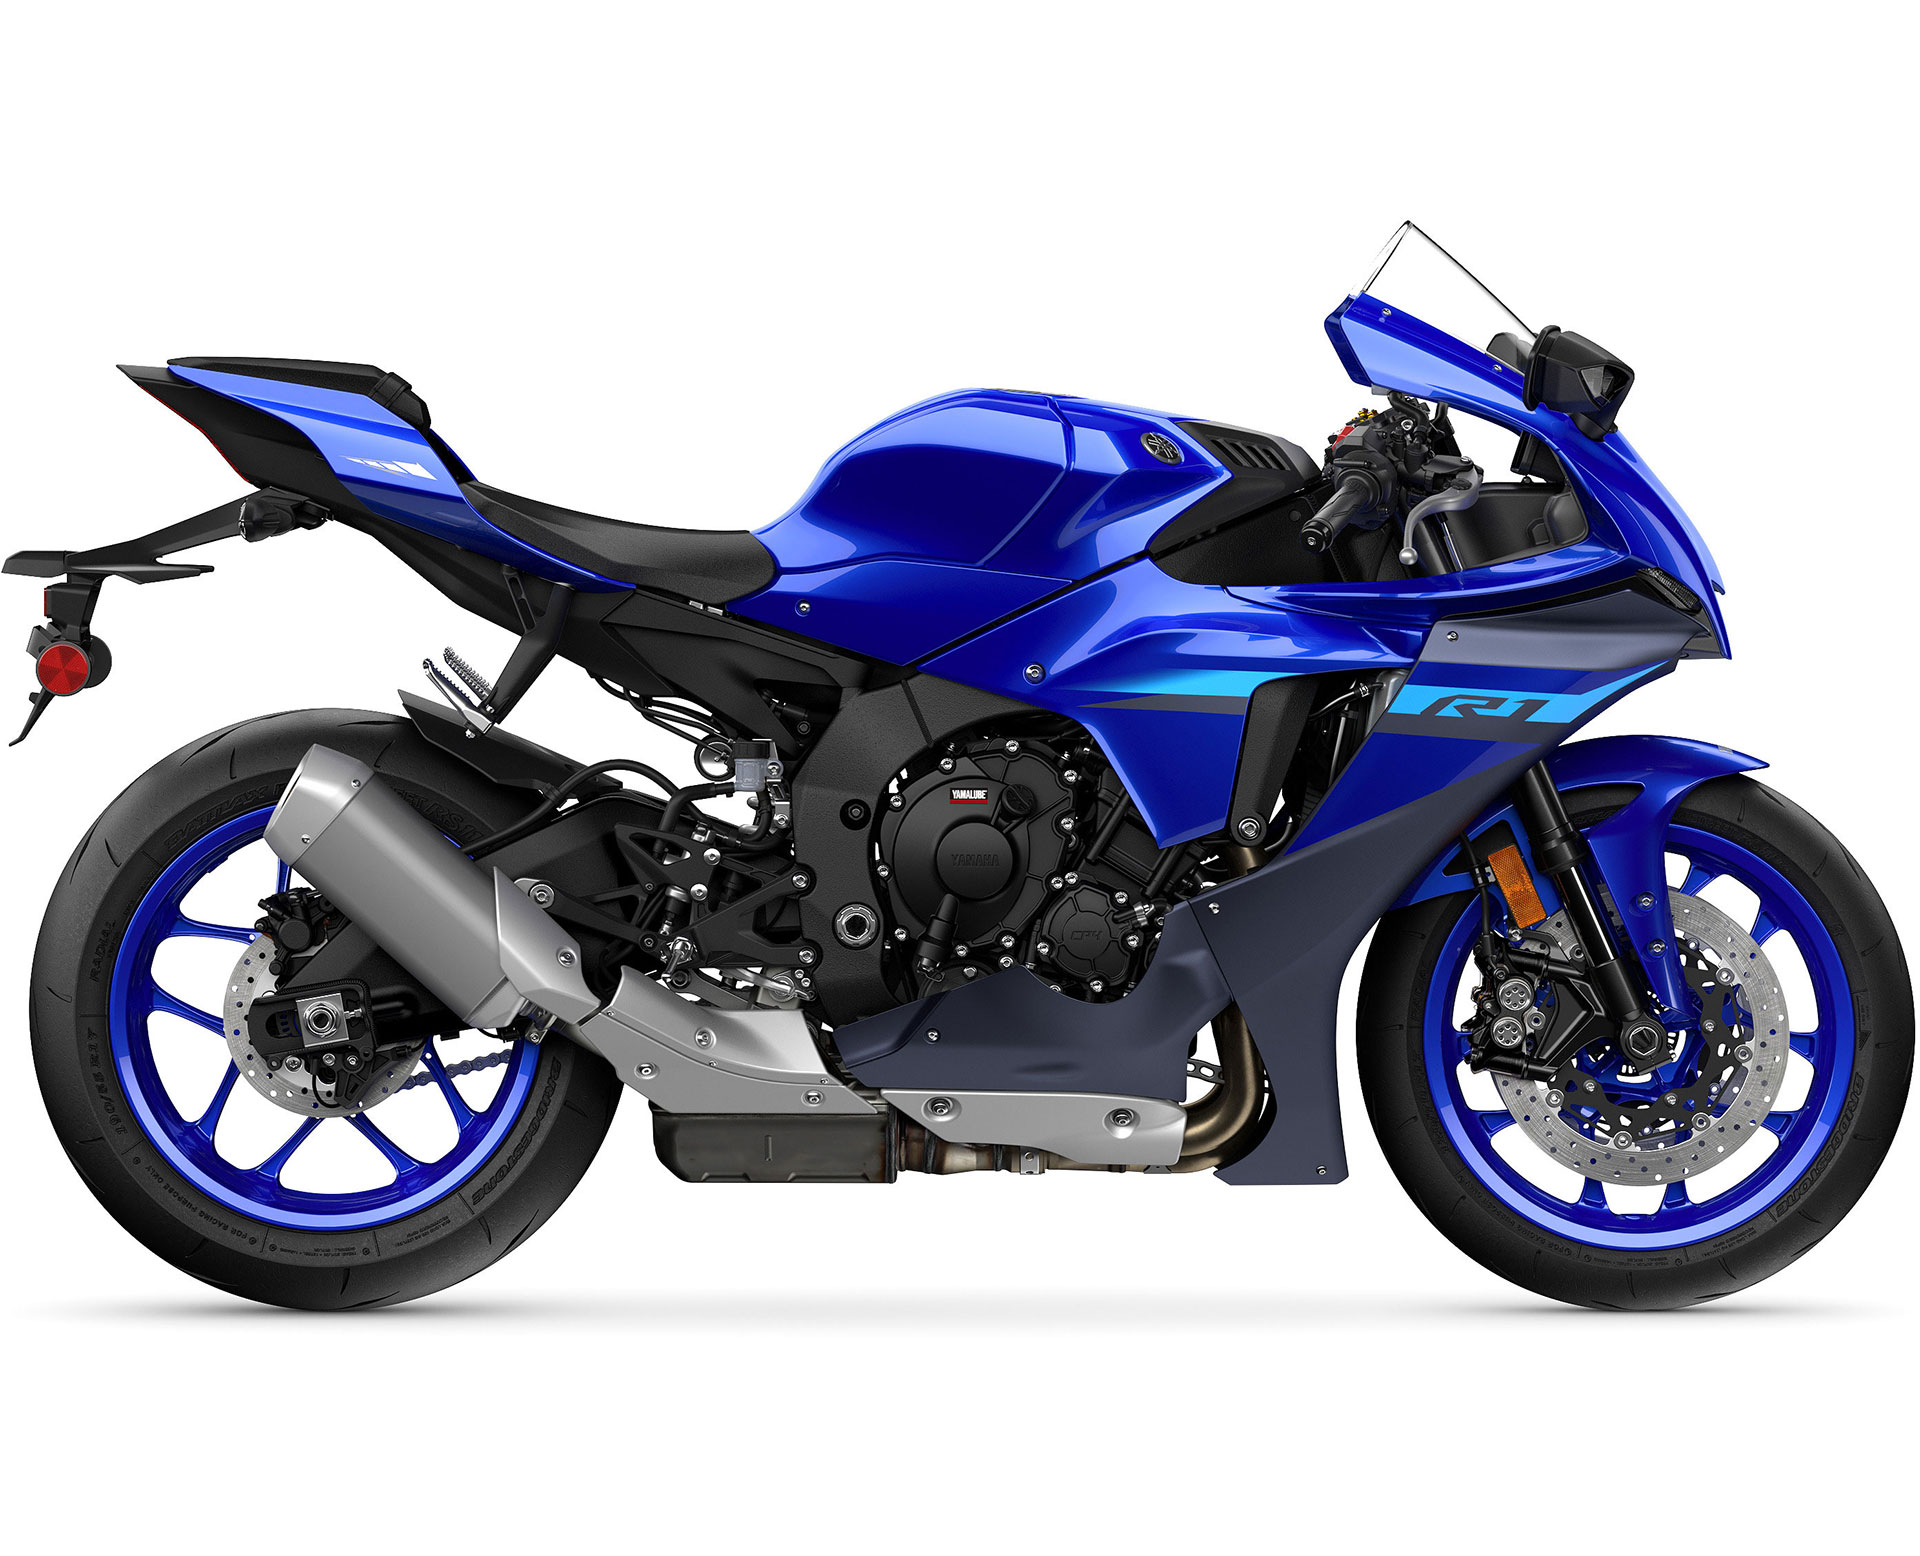 Thumbnail of your customized 2024 YZF-R1